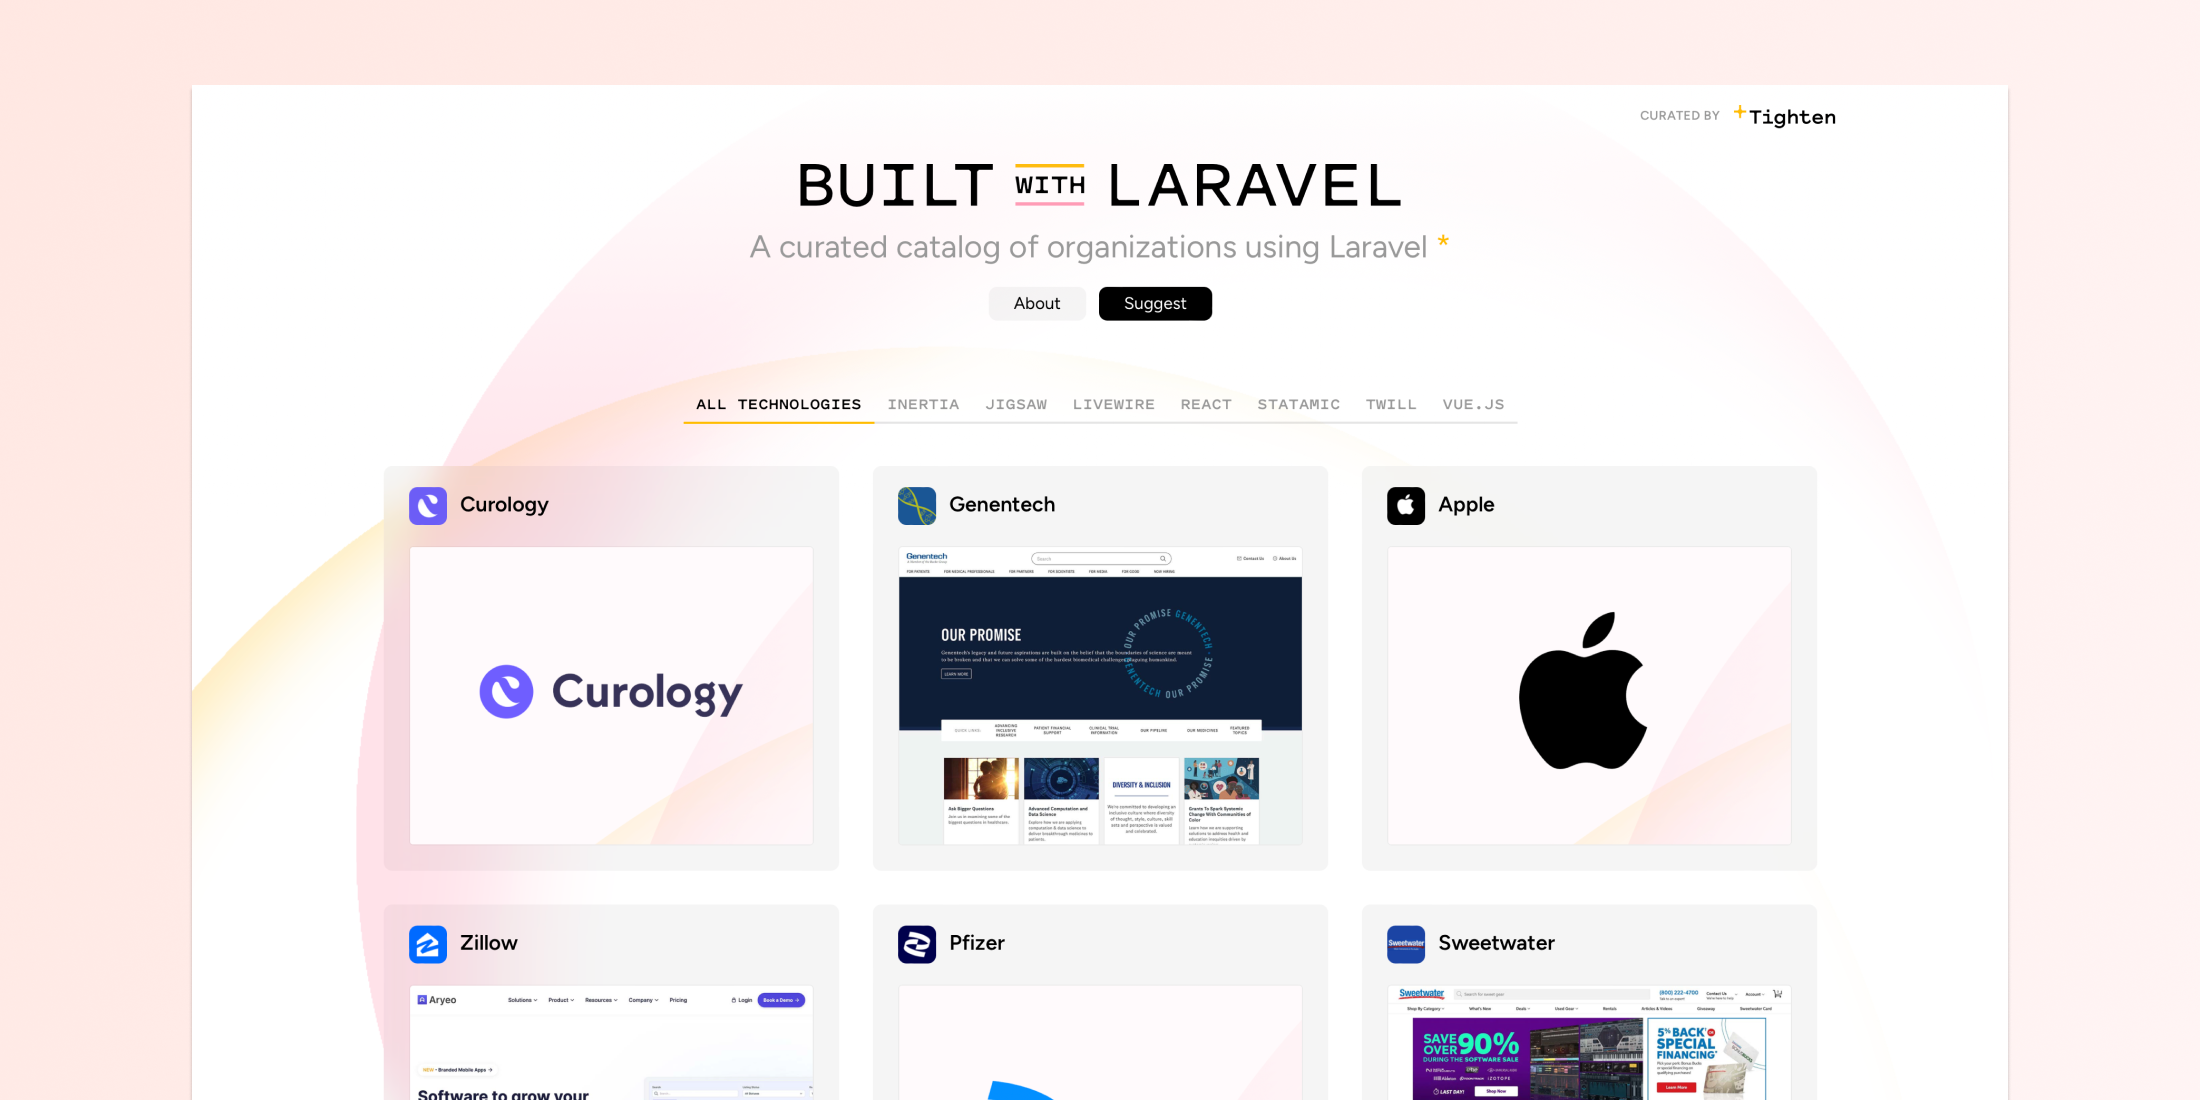 Introducing Built with Laravel image